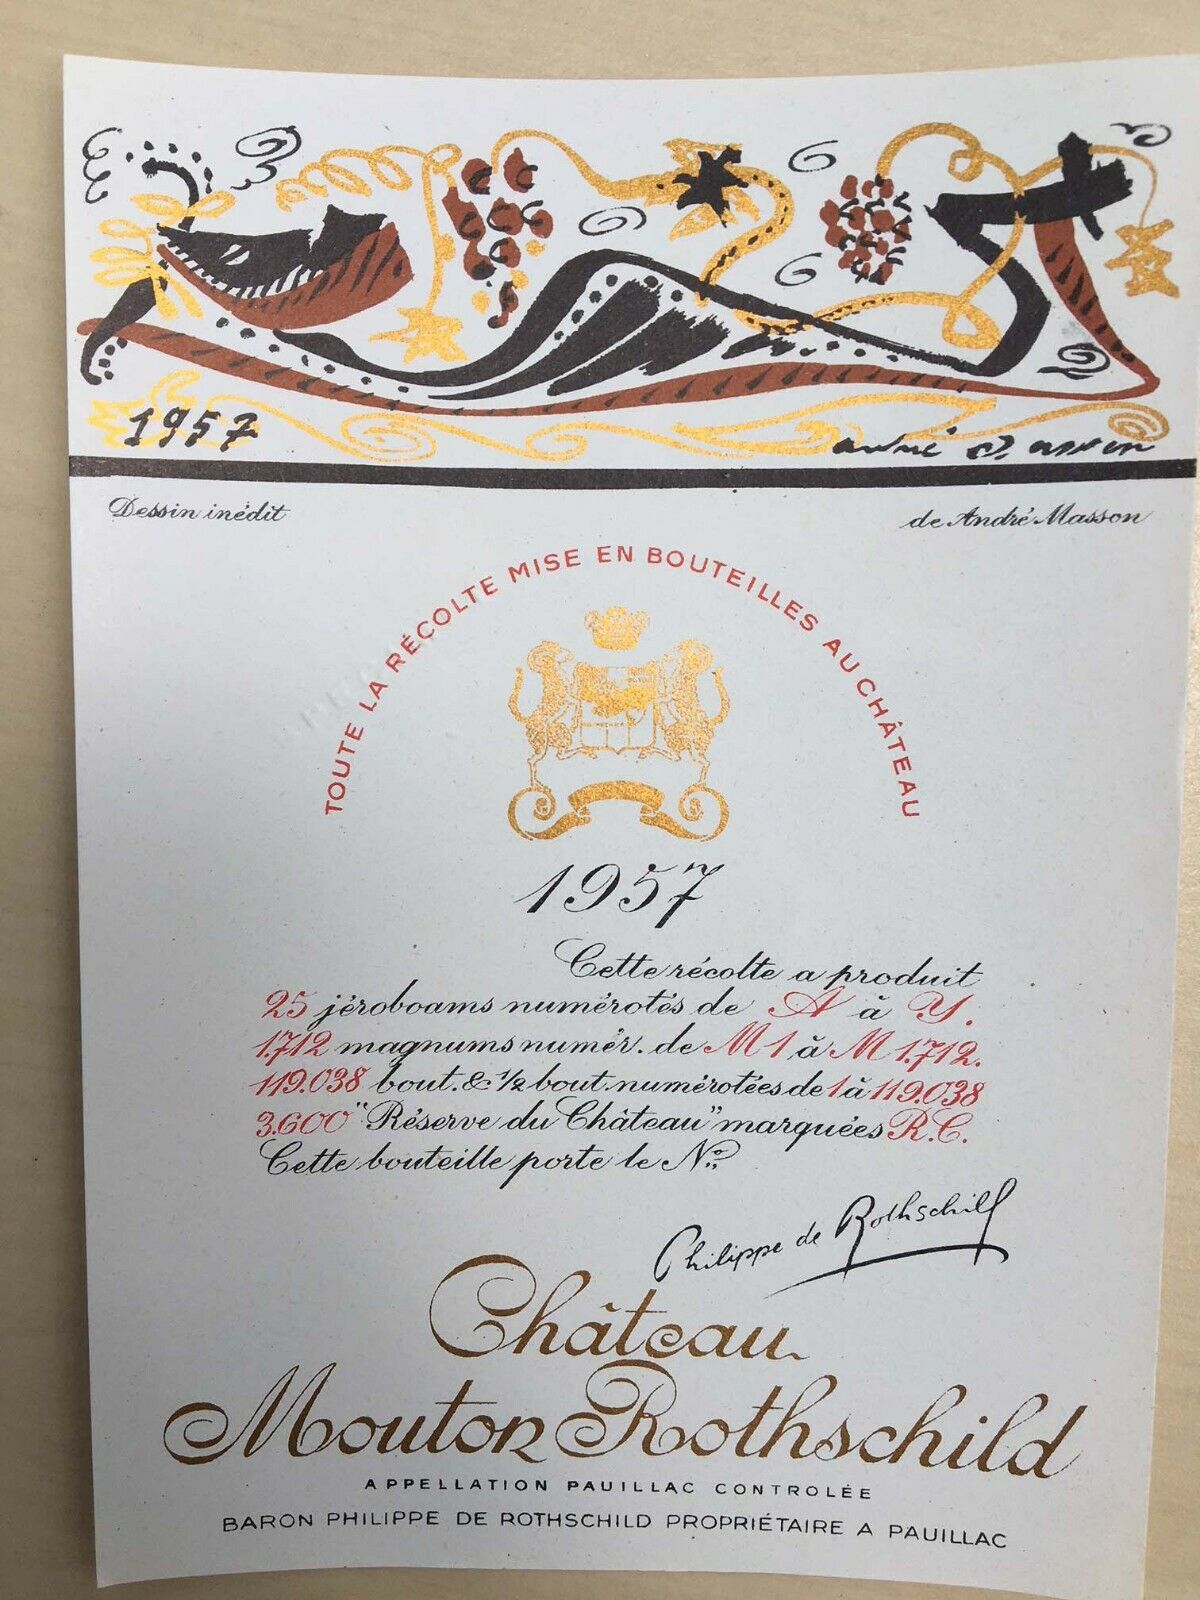 The 1957 Chateau Mouton Rothschild (Specimen) - Label By: Andre Masson